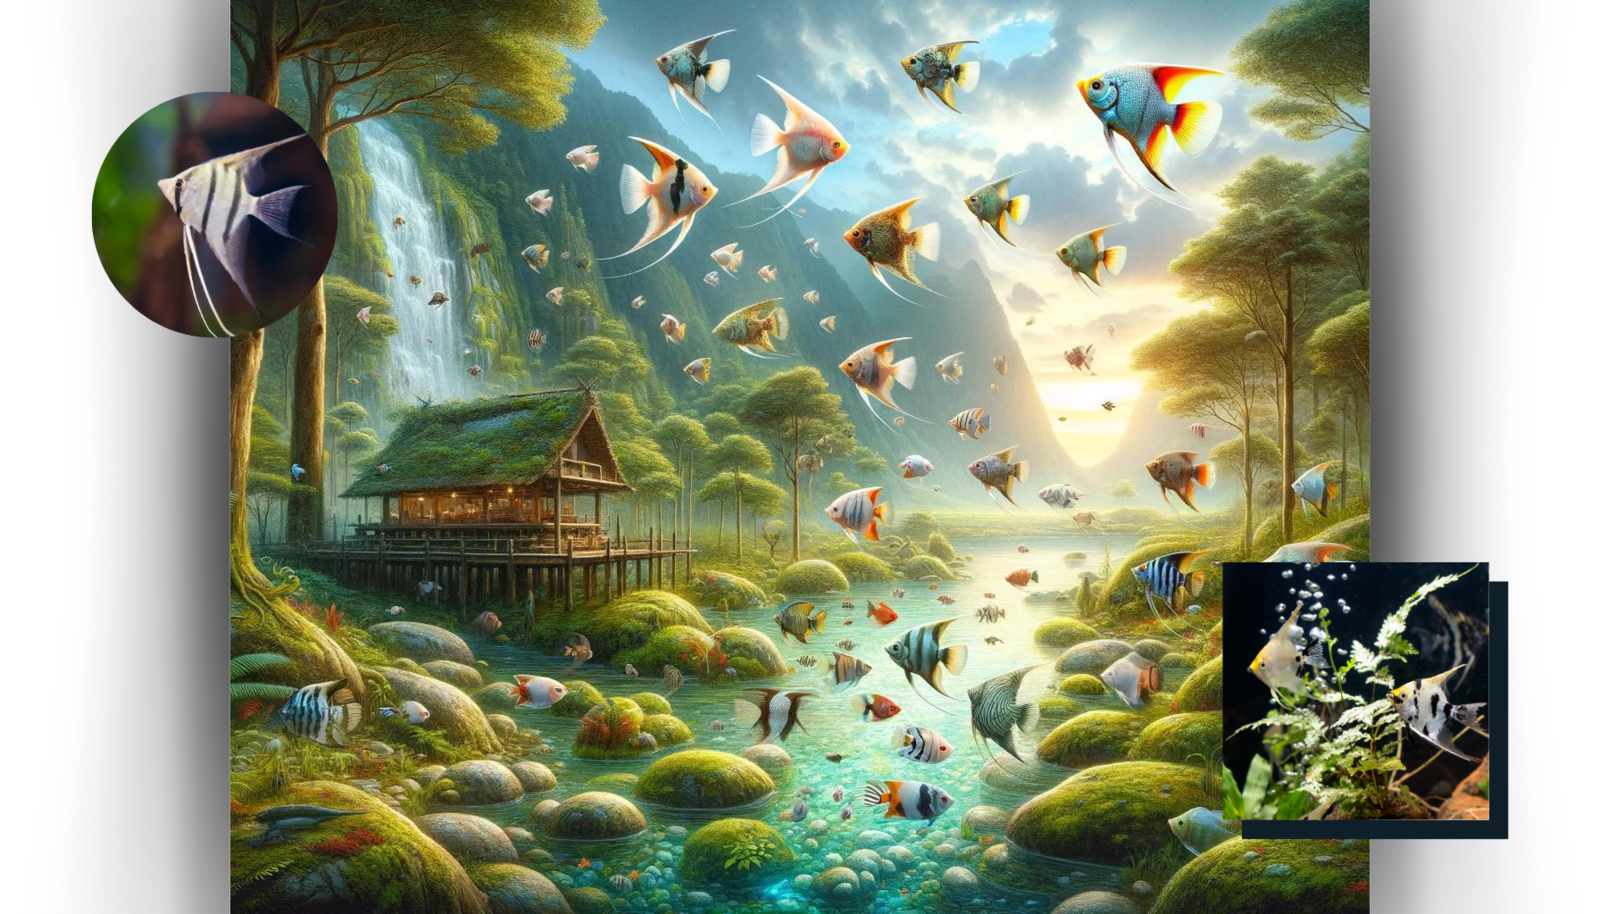 A fantasy landscape where angelfish are swimming through the air among waterfalls, rivers, and lush greenery, with a cabin in the background, alongside close-up images of individual angelfish, signifying their peaceful nature and suitability for community aquariums.